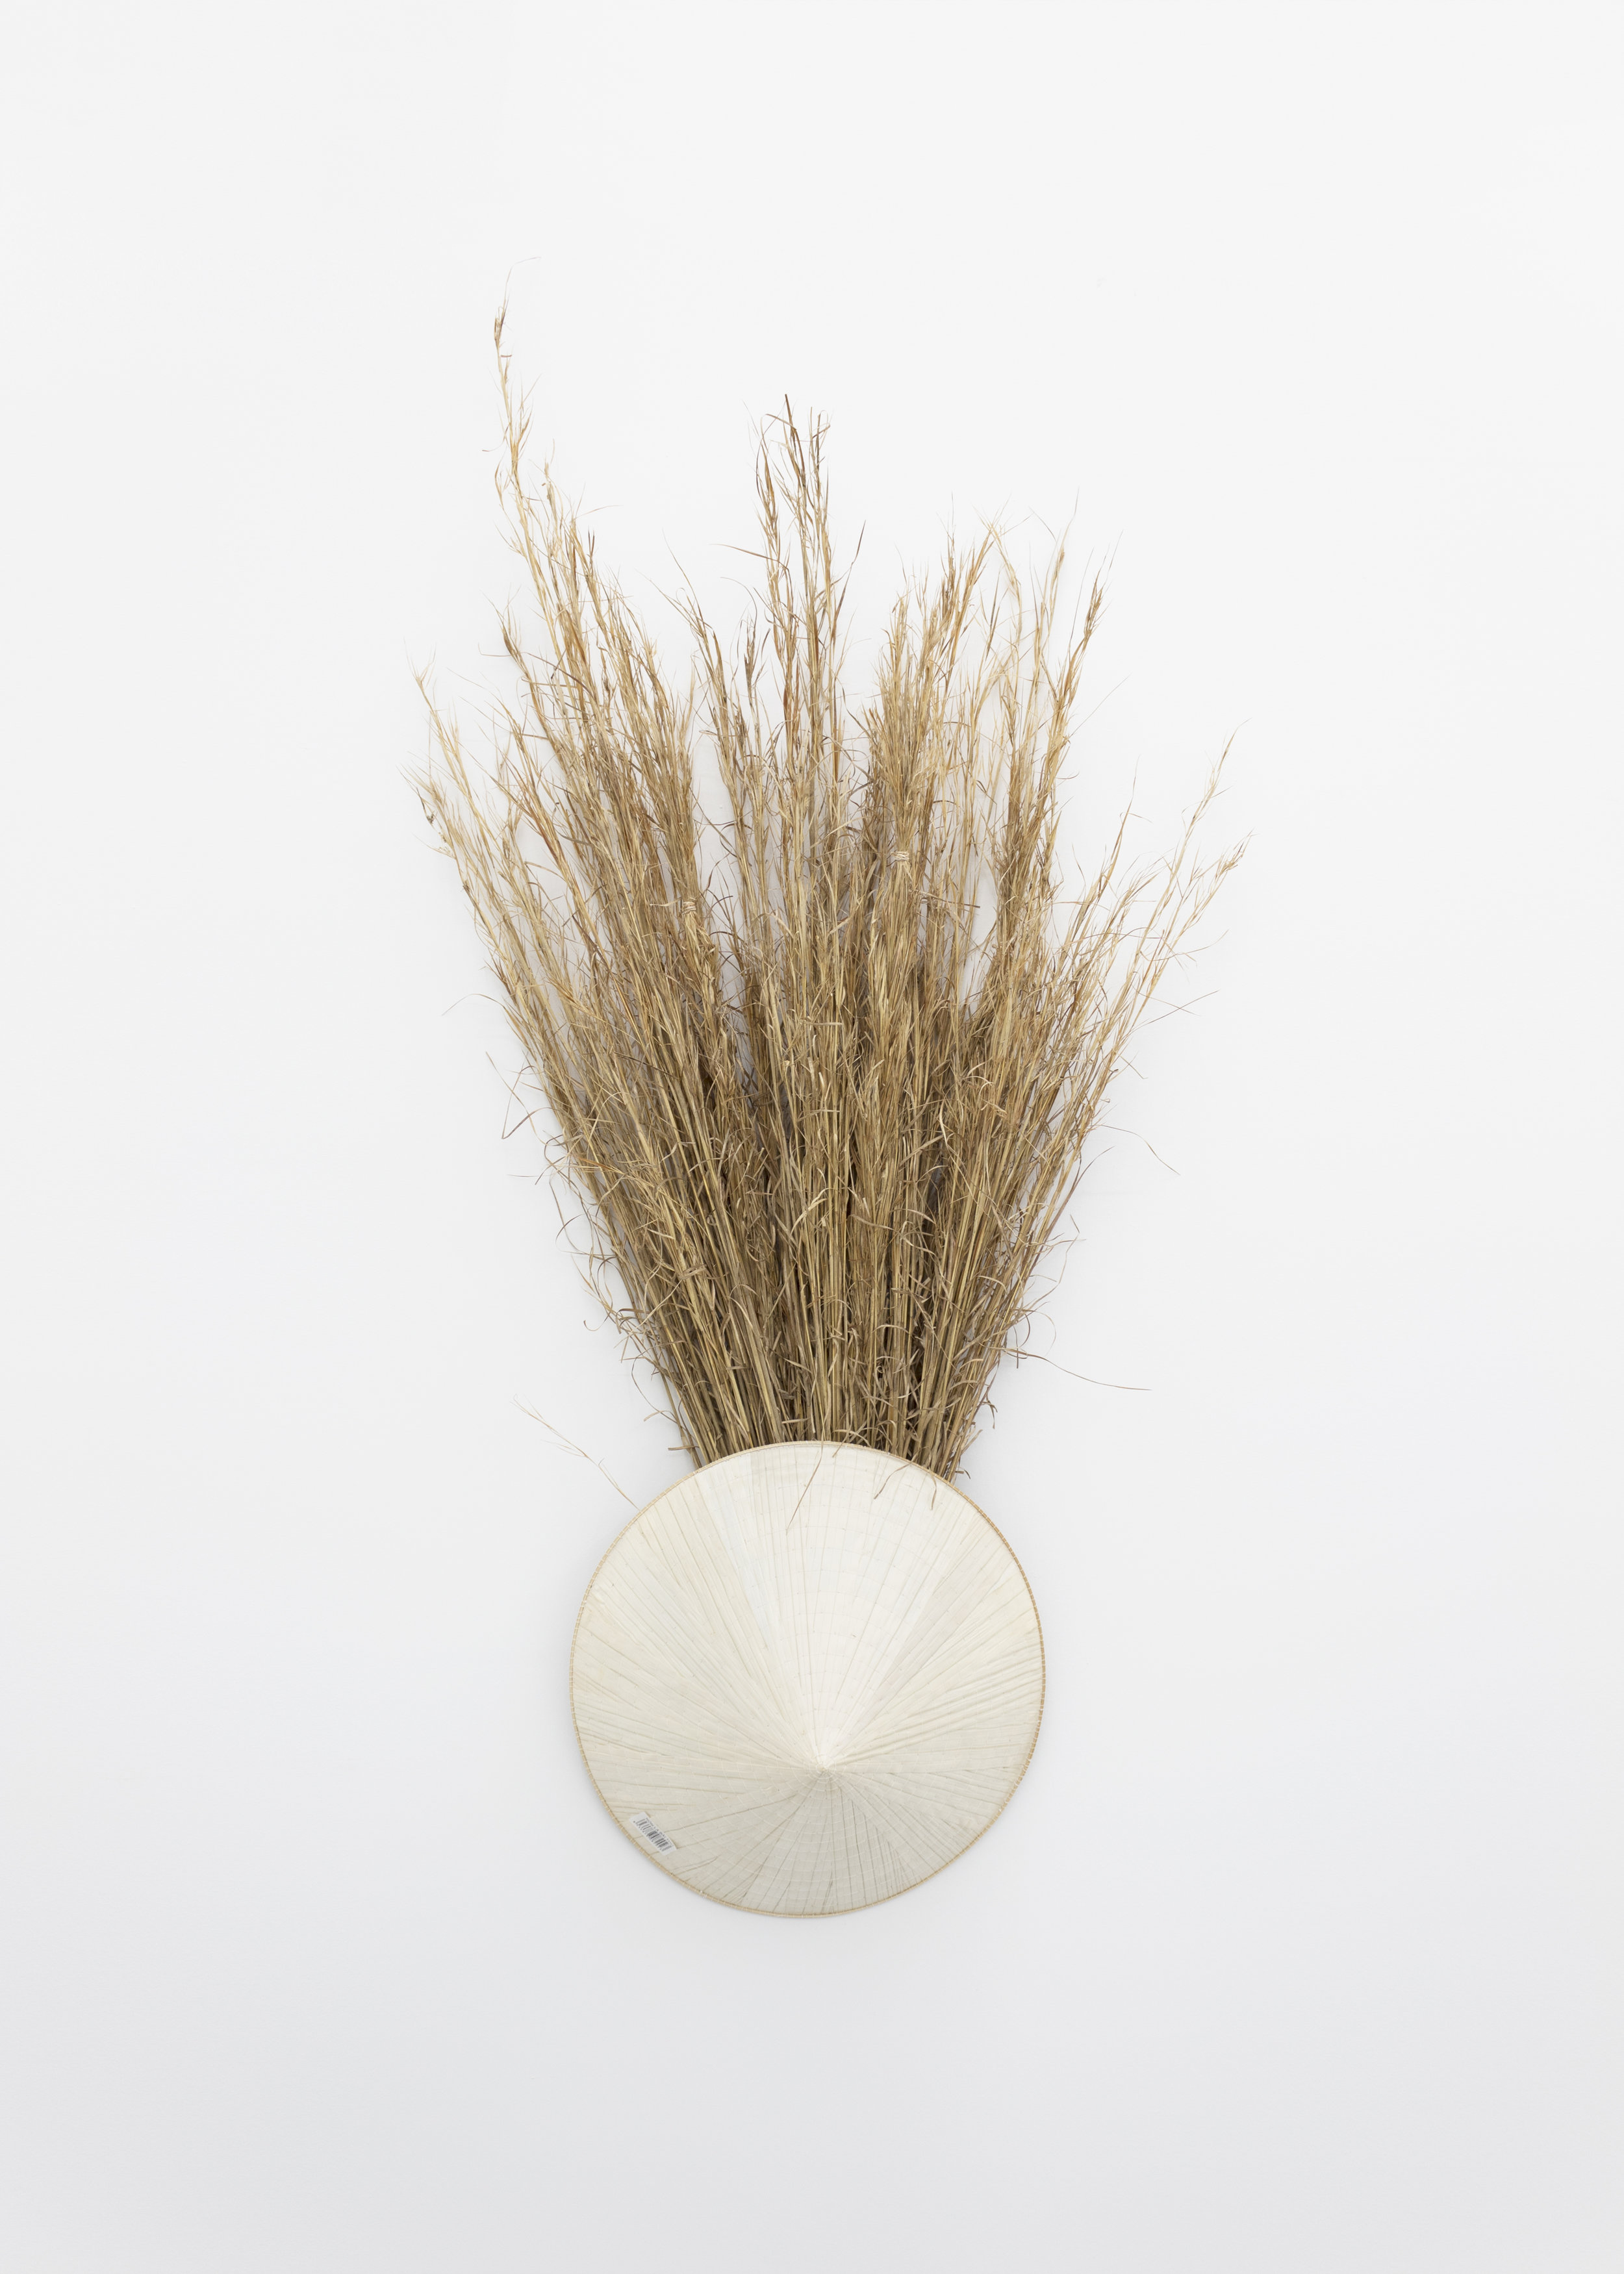  Millian Giang Lien Pham,  Preforge: 9 Stages (Four) , 2019. Grass, conical hat 